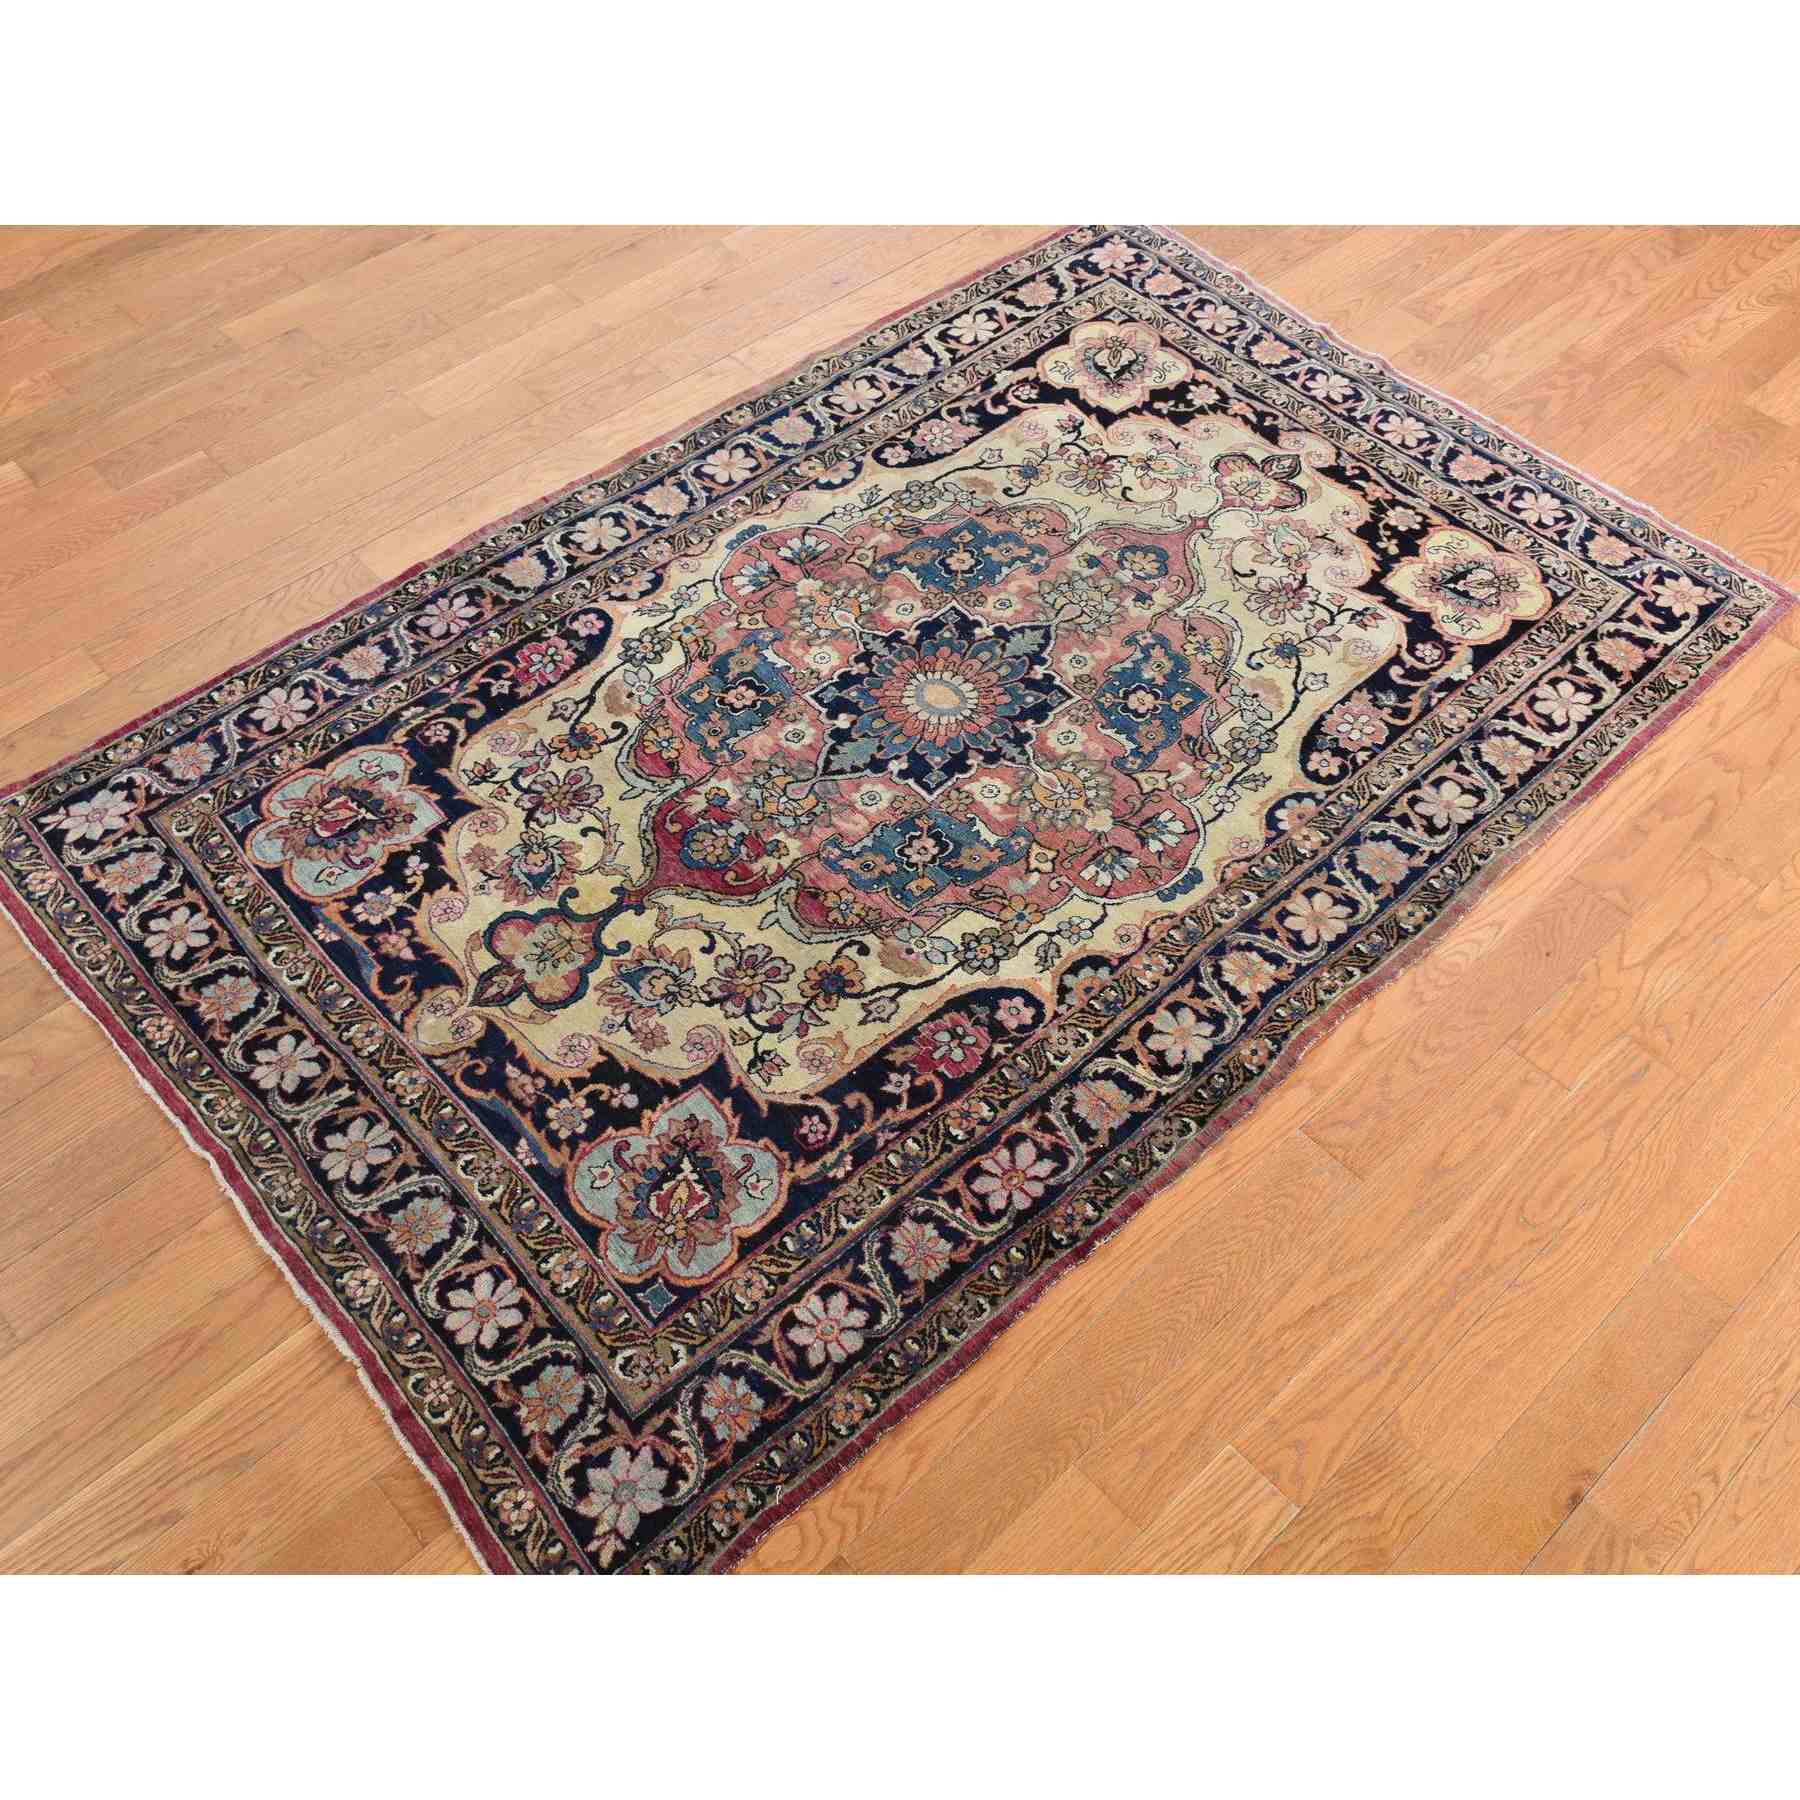 Antique-Hand-Knotted-Rug-390905